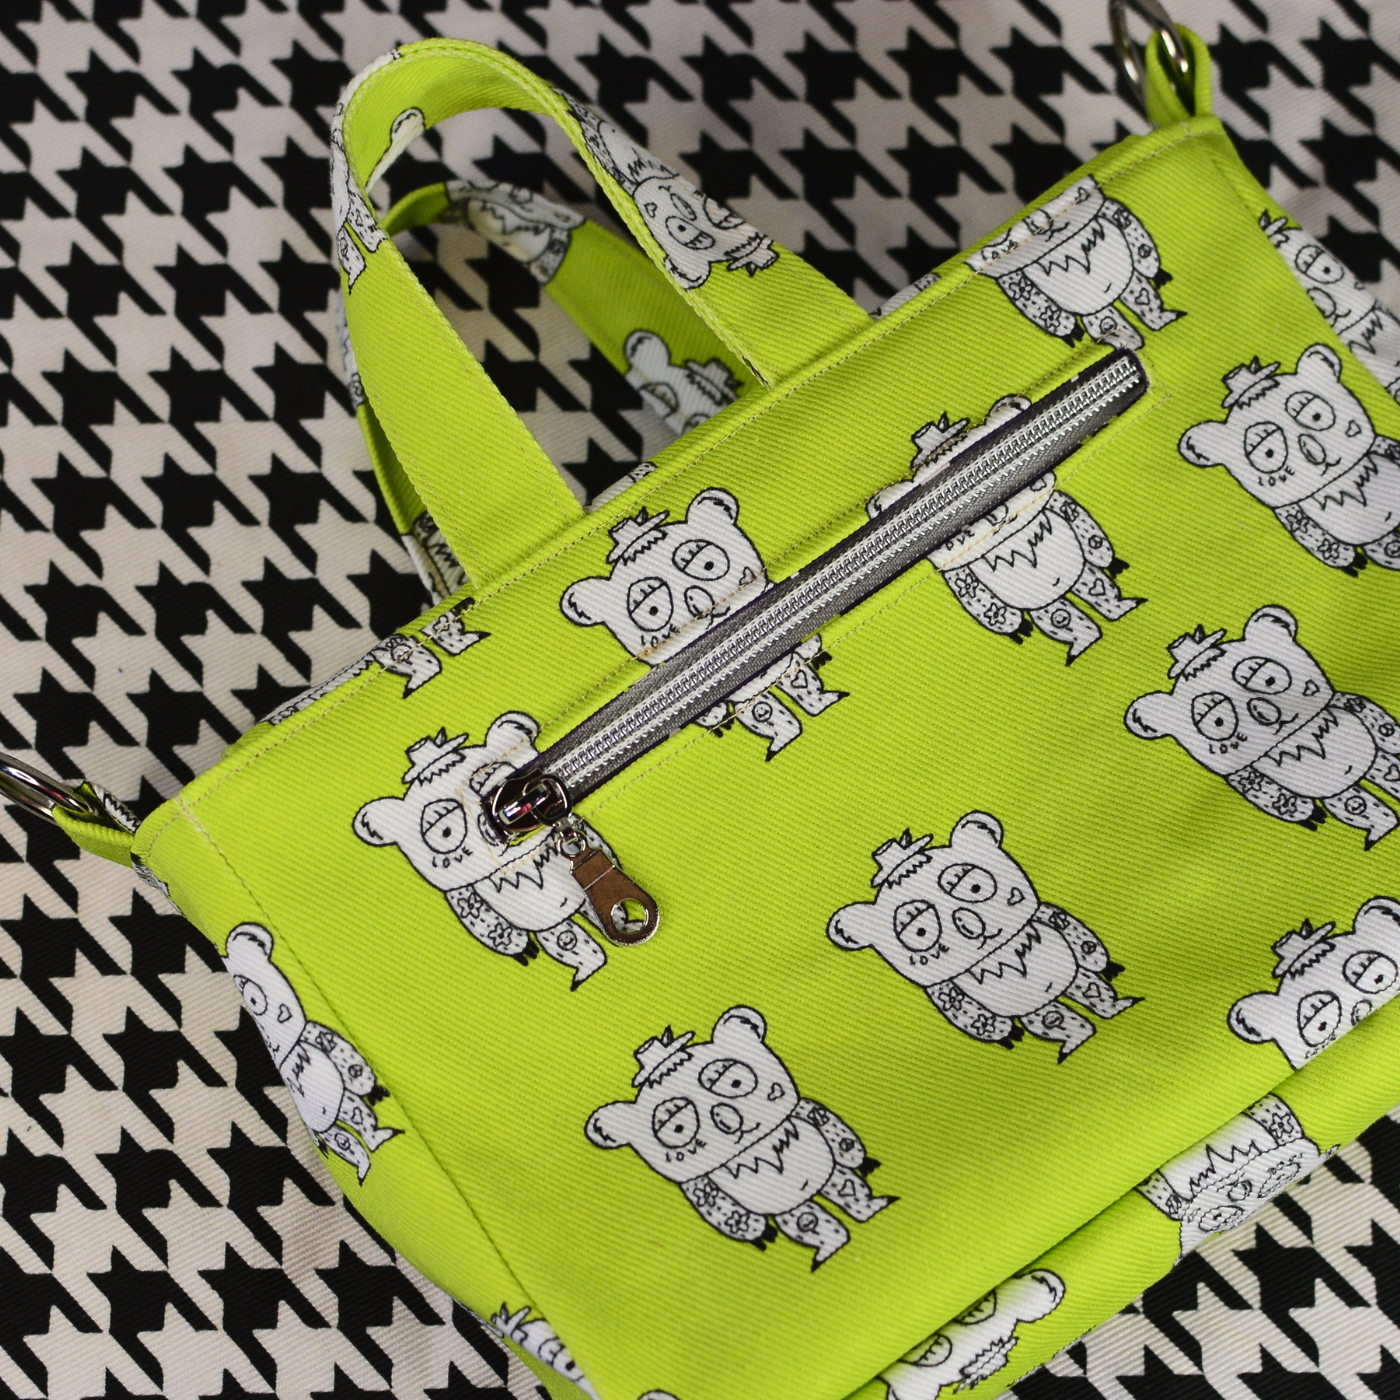 A small neon green bag with two handles and a zippered section in the front featuring rows of white bears with tattoos wearing hats outlined in black. The bag is lying on a black-and-white geometric print surface.